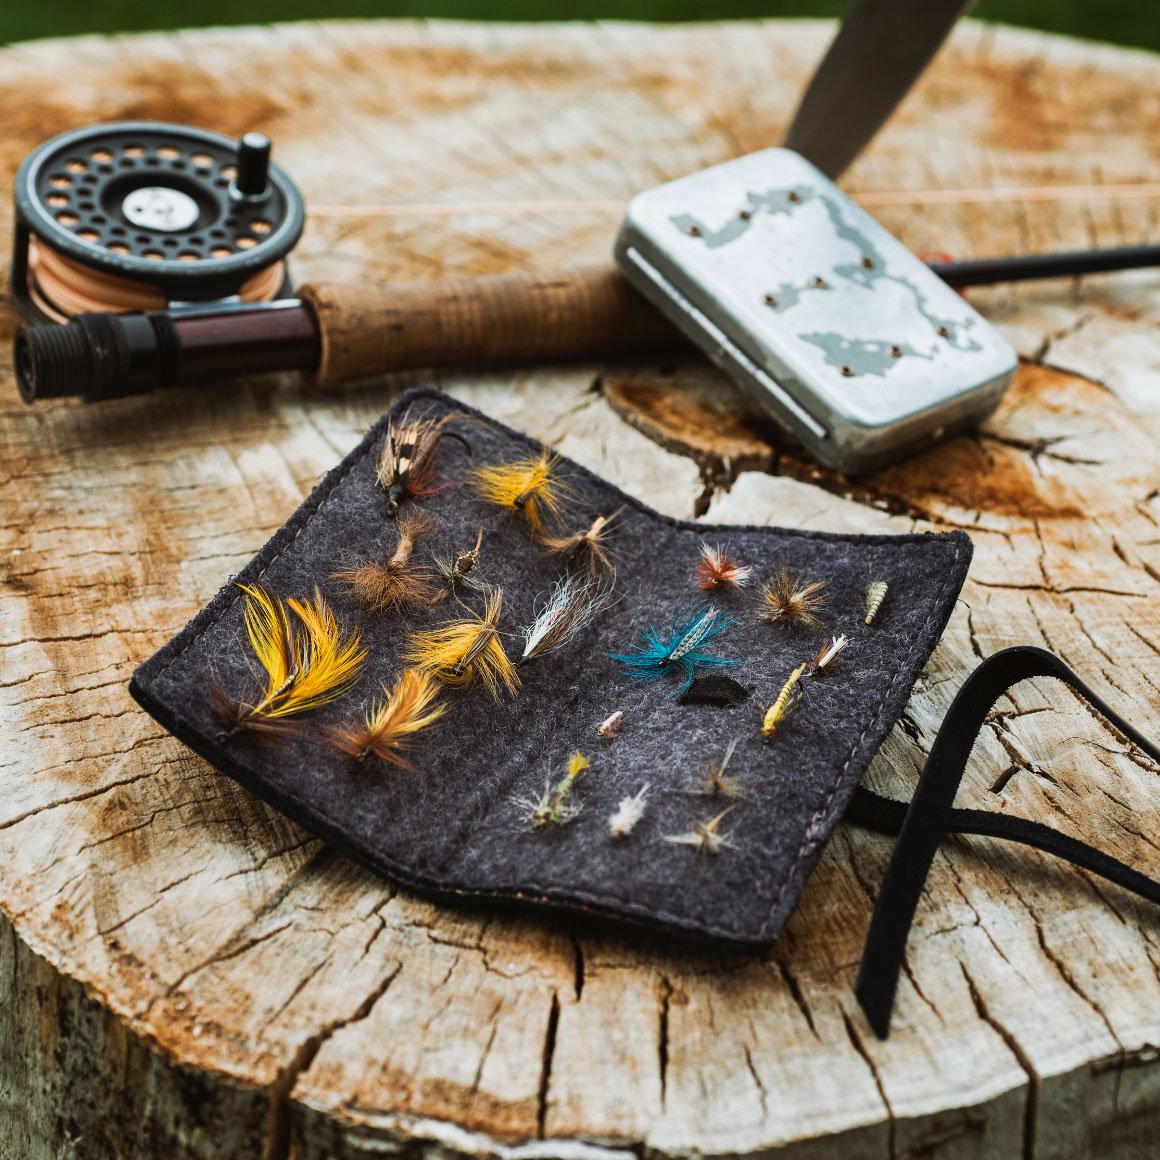 Leather Fly Fishing Wallet - Book of Flies